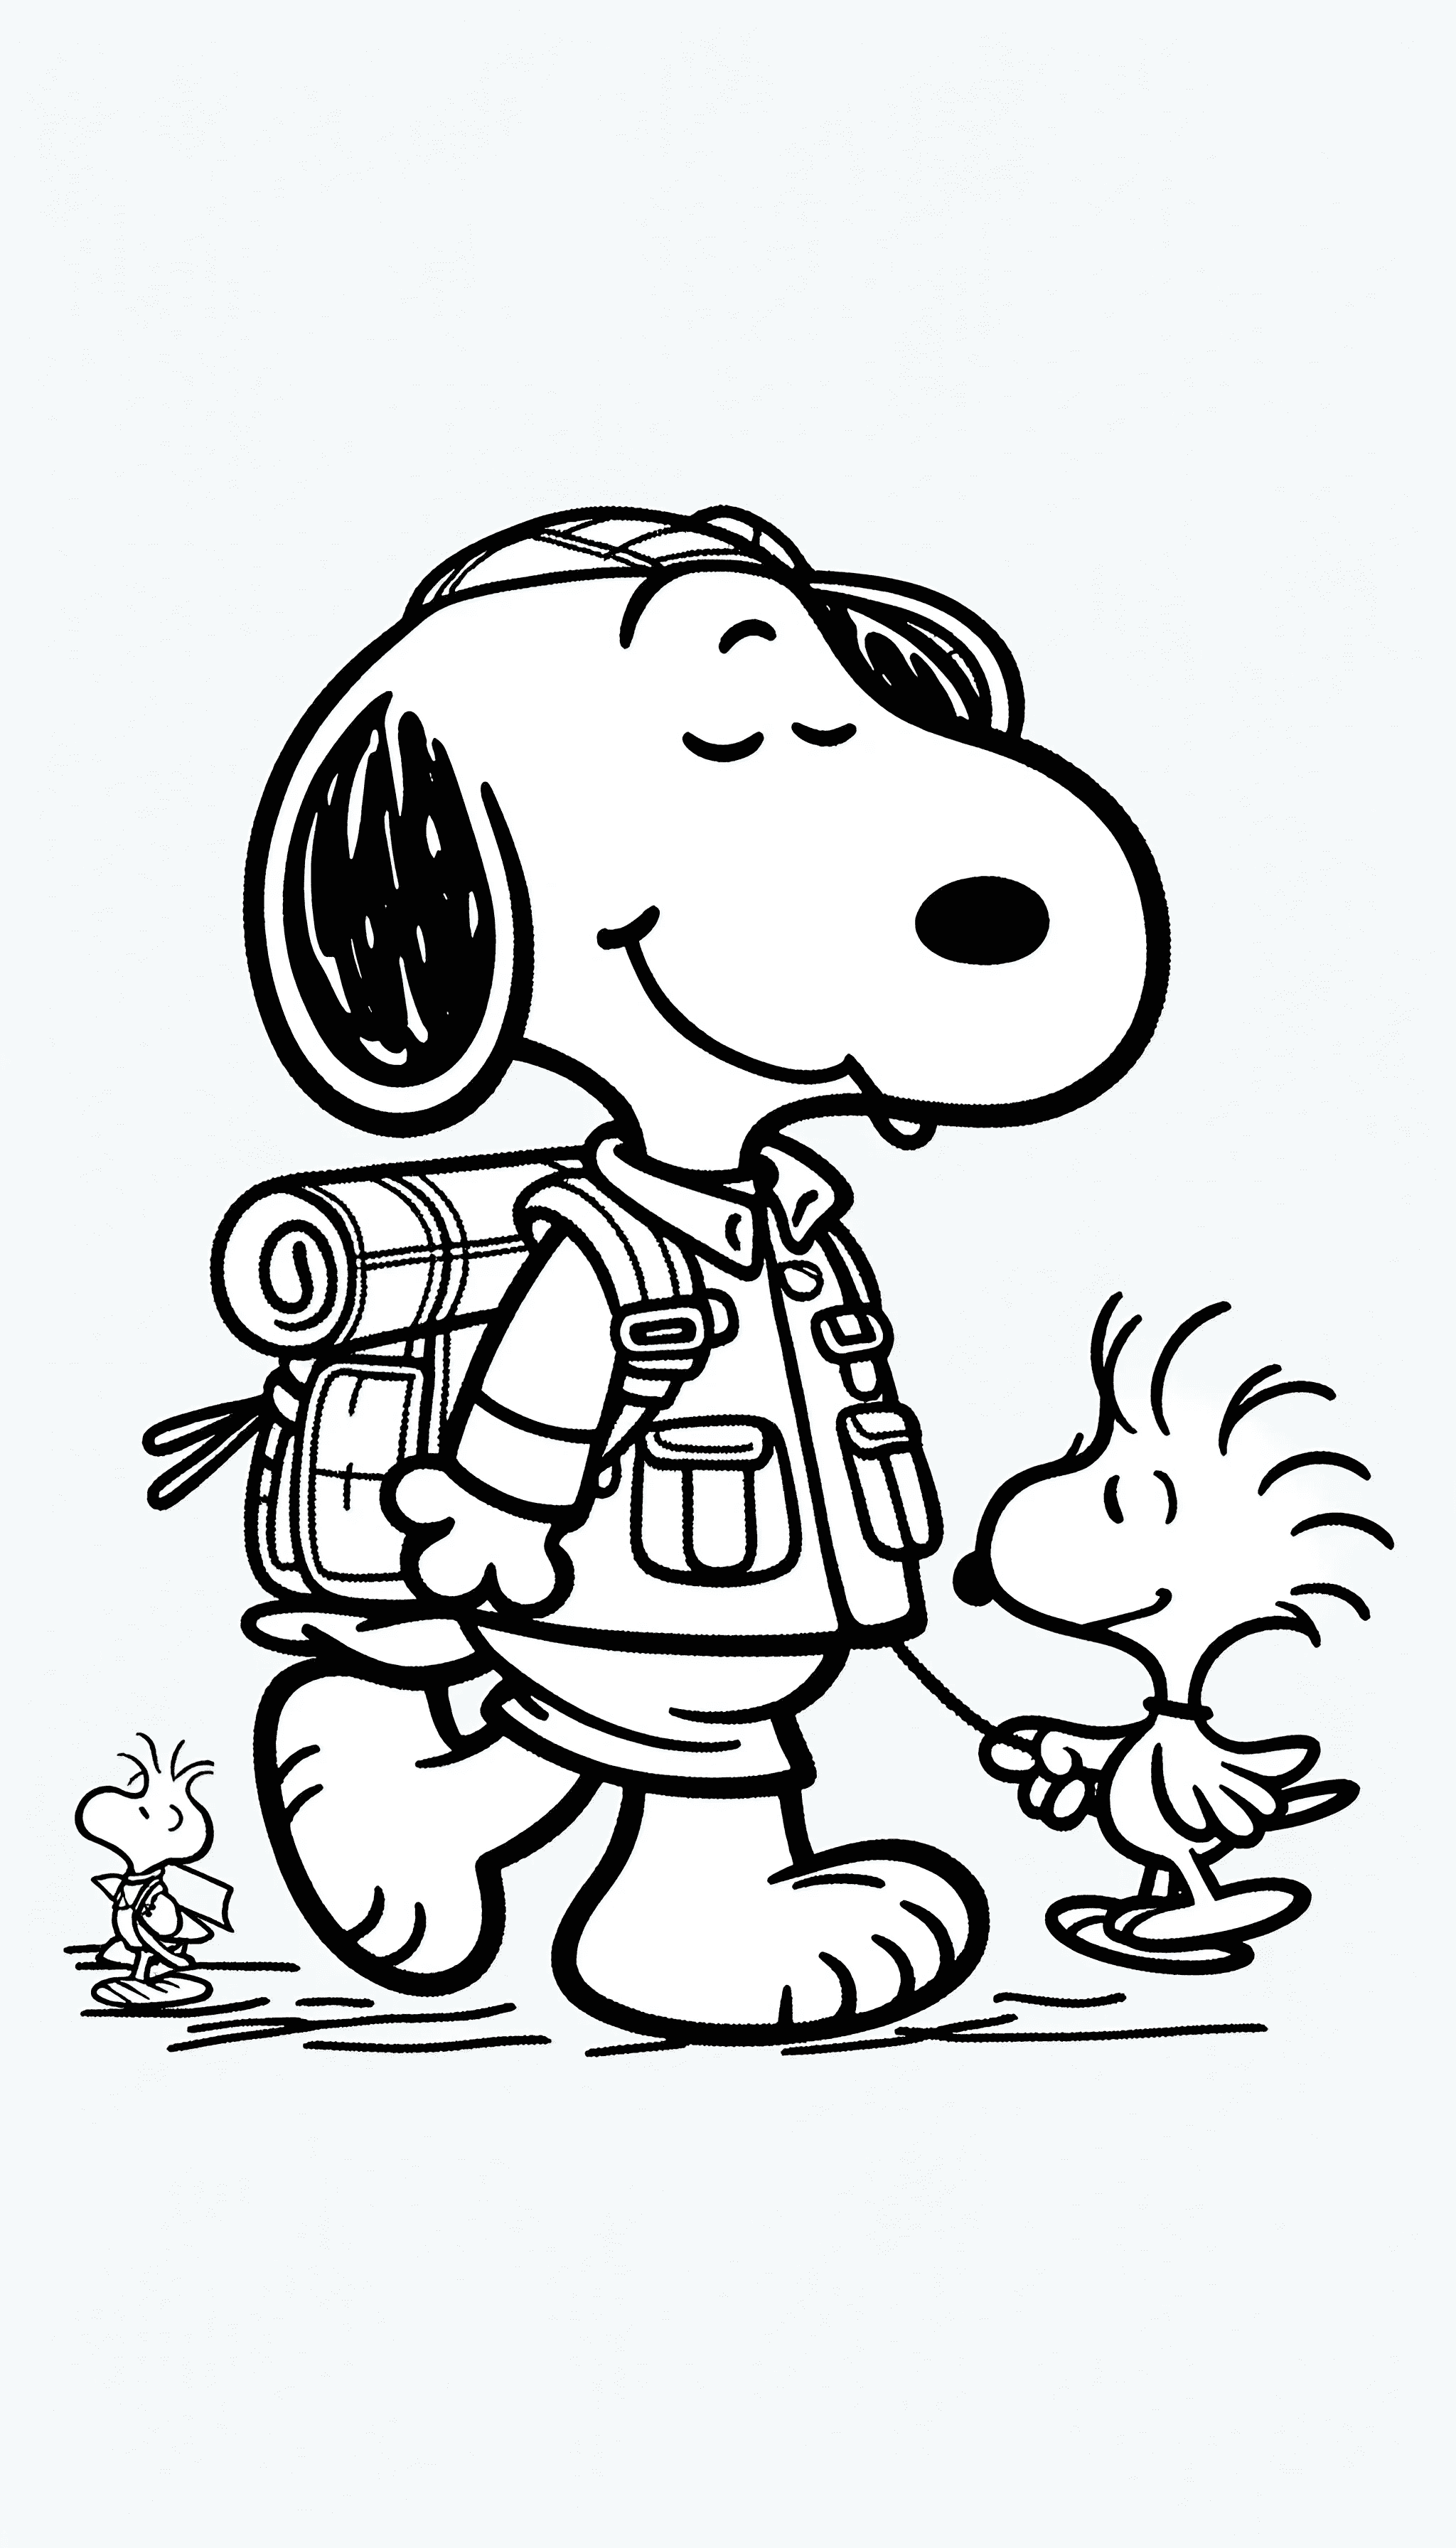 Snoopy coloring pages for free printable